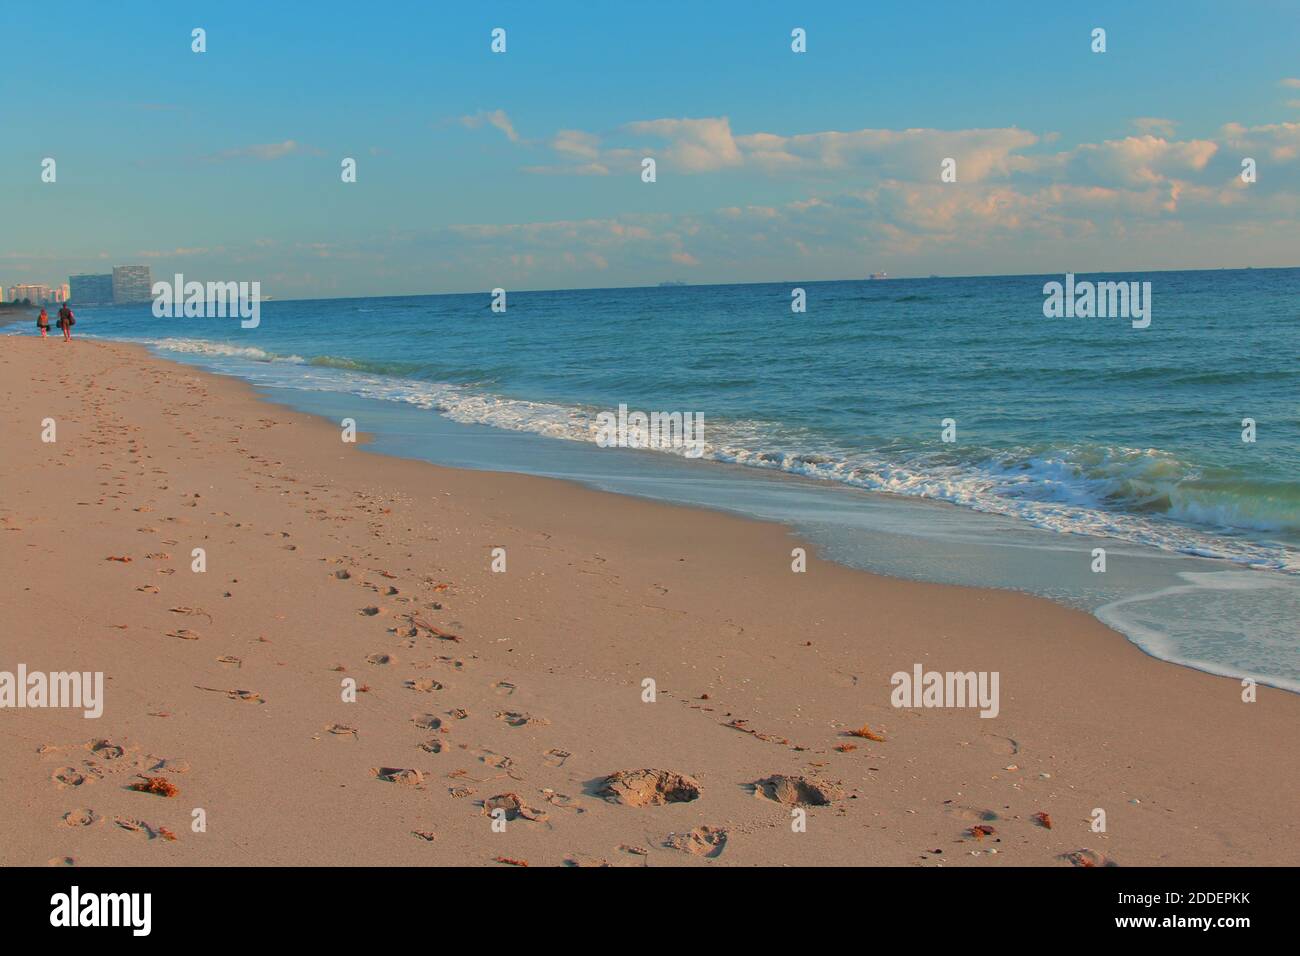 Footprints on the shore and a peaceful ocean Stock Photo